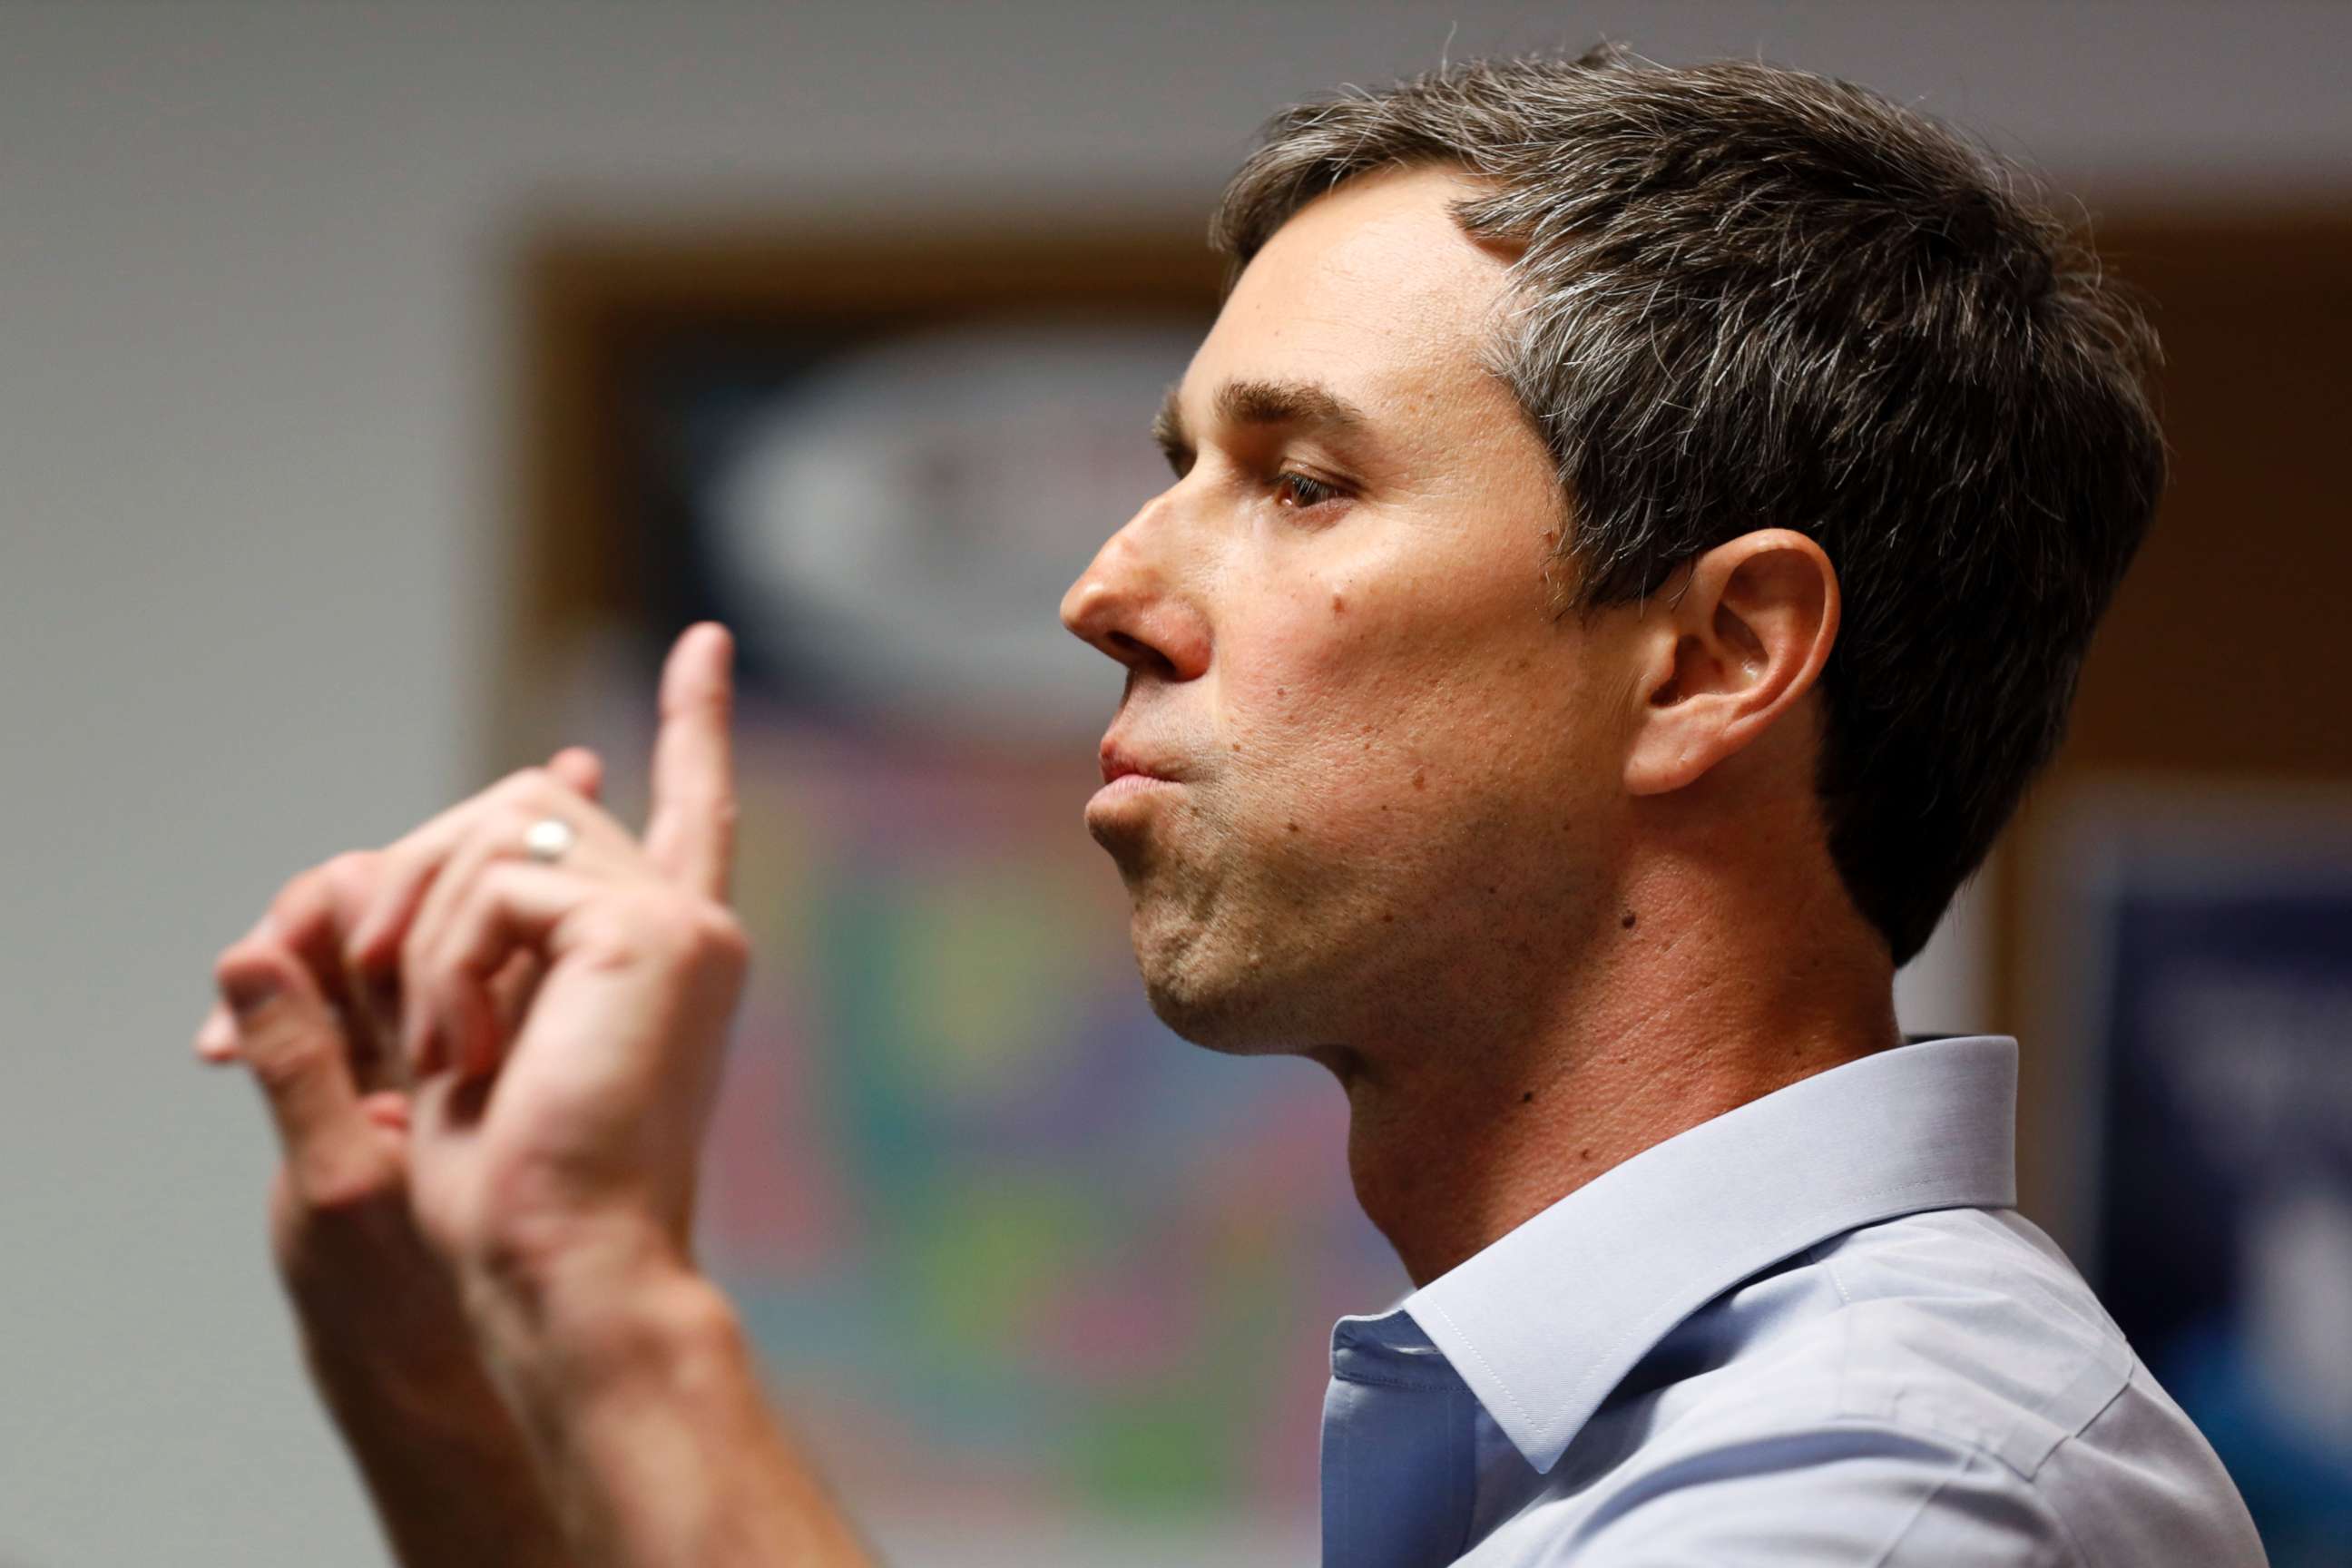 PHOTO: Beto O'Rourke speaks at the International Brotherhood of Electrical Workers Local 13 hall in Burlington, Iowa, March 14, 2019.